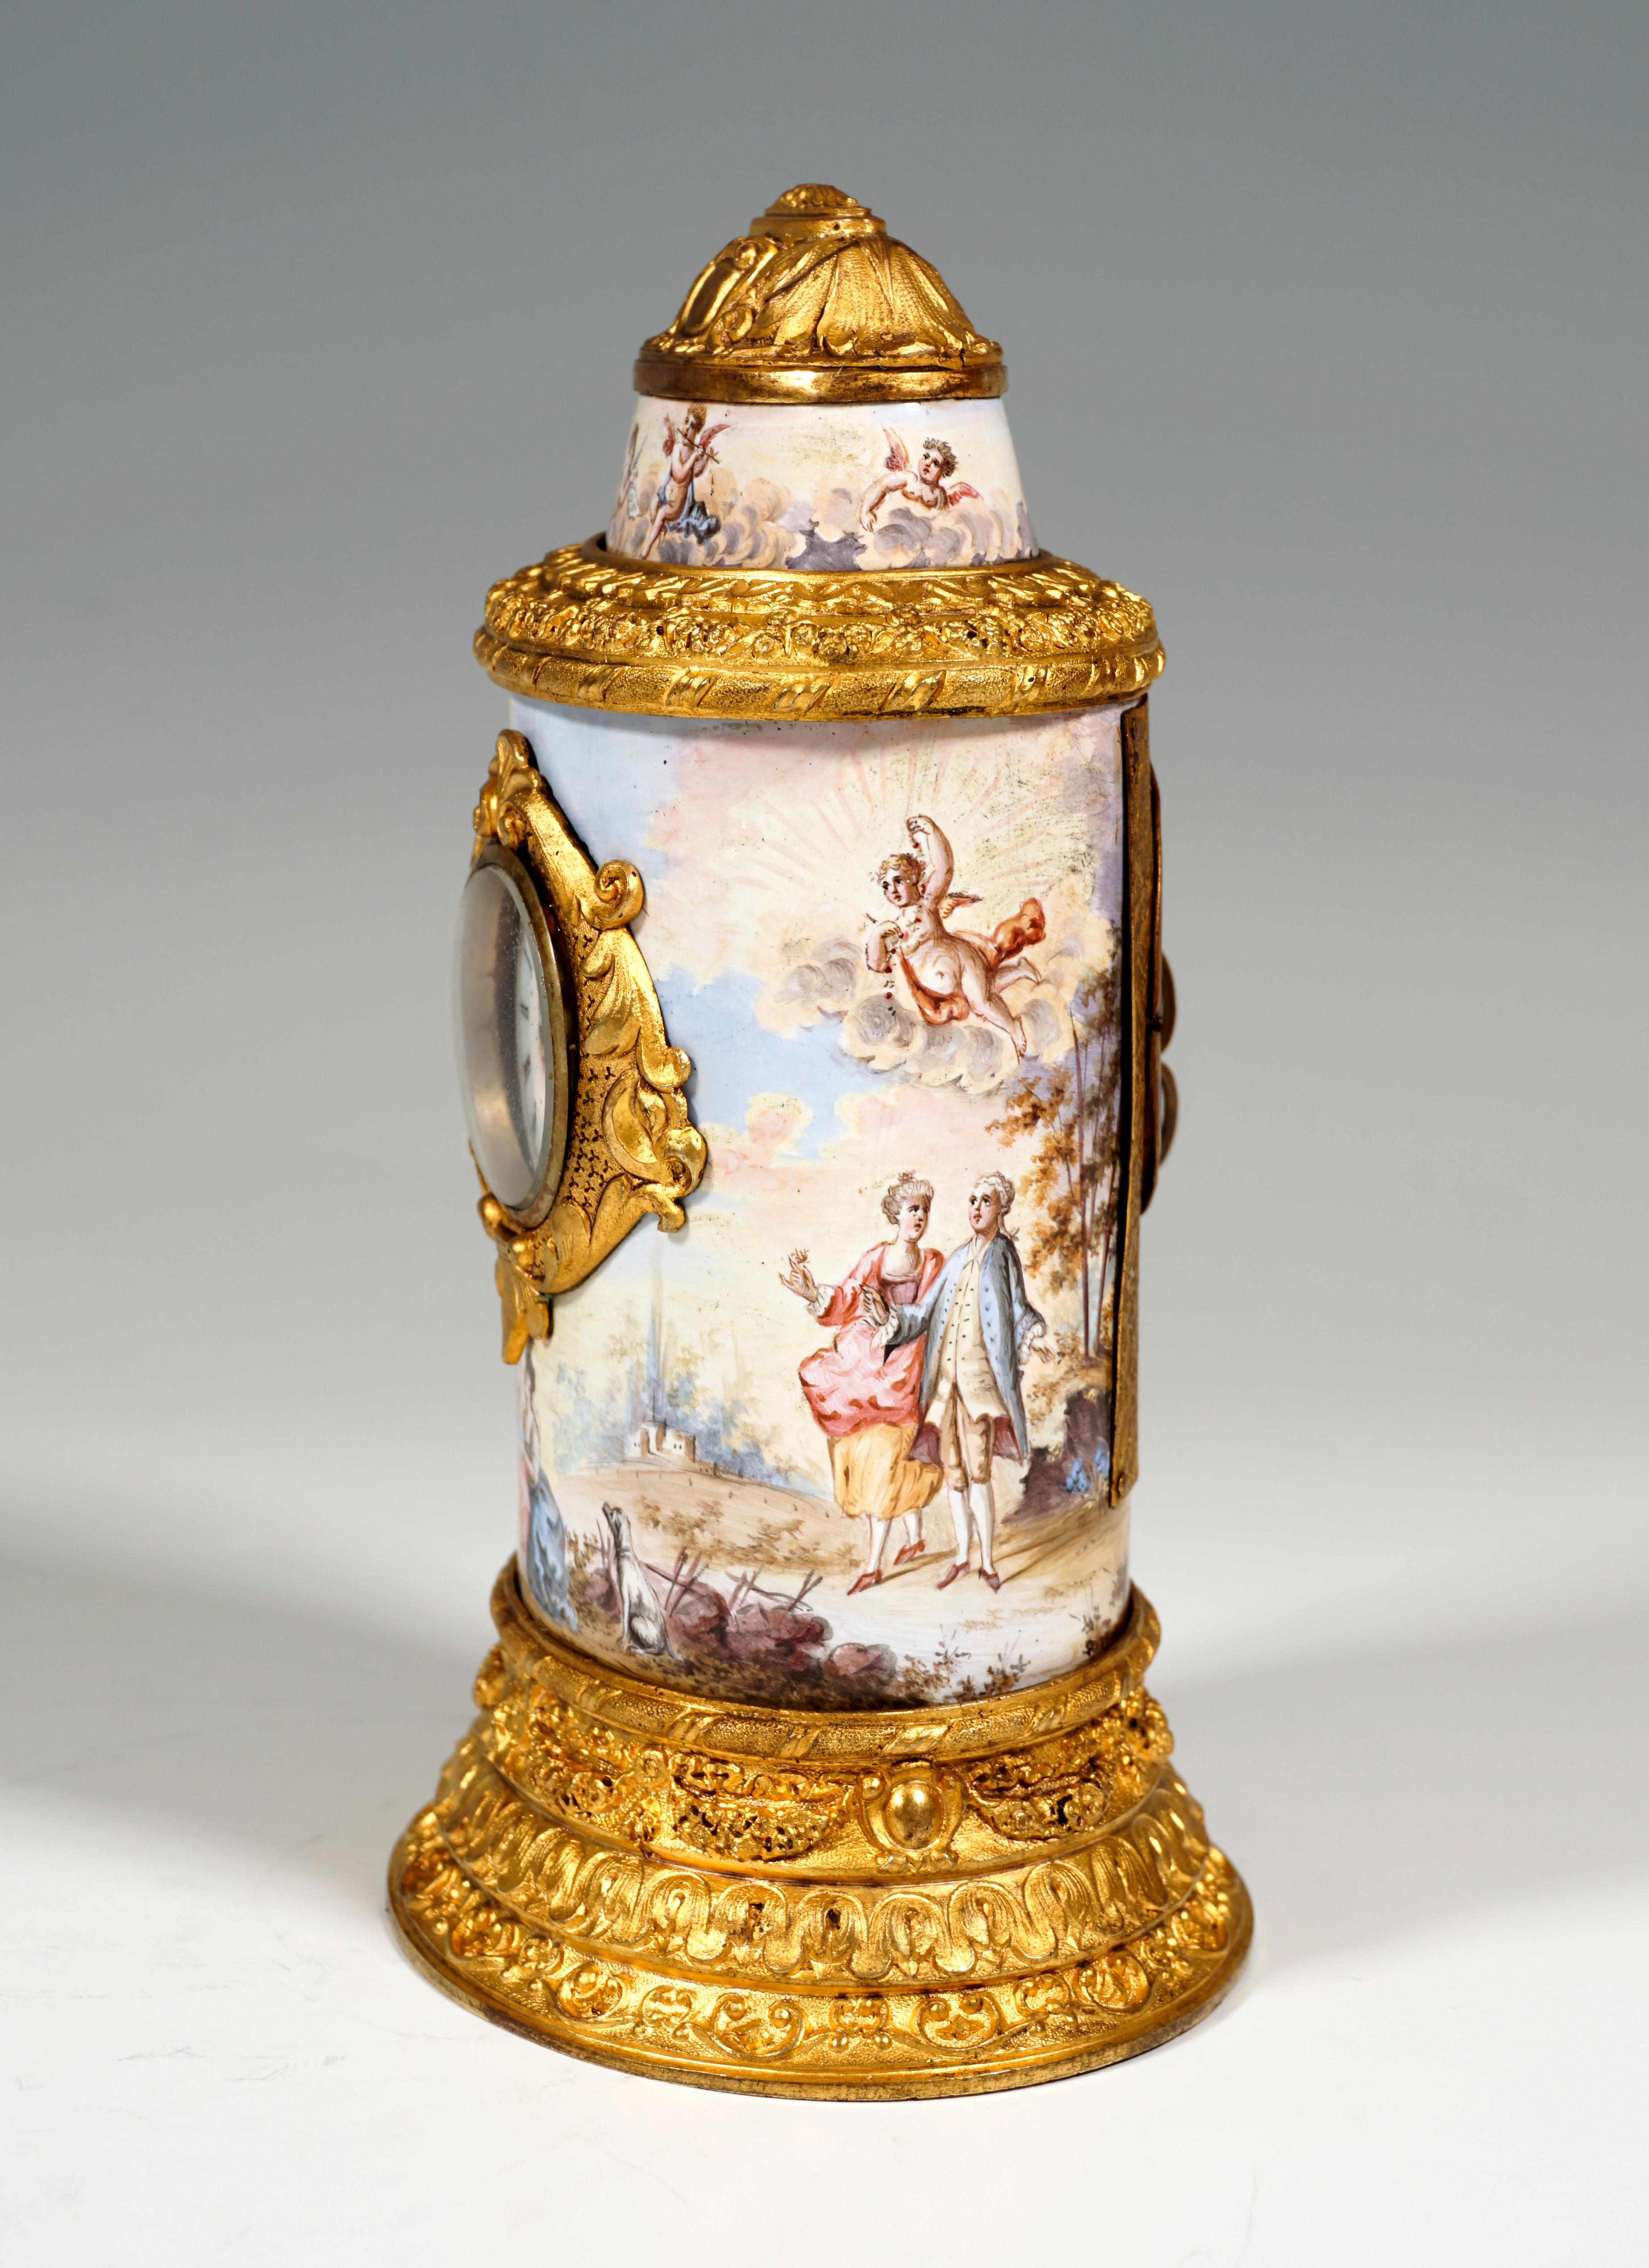 Finest Viennese Enamel work from around 1880:
Body in the form of an elliptical cylinder, designed like an advertising column: stepped base, faceplate and all covers made of fire-gilded bronze with tendril, leaf and rocaille bands, smooth surfaces